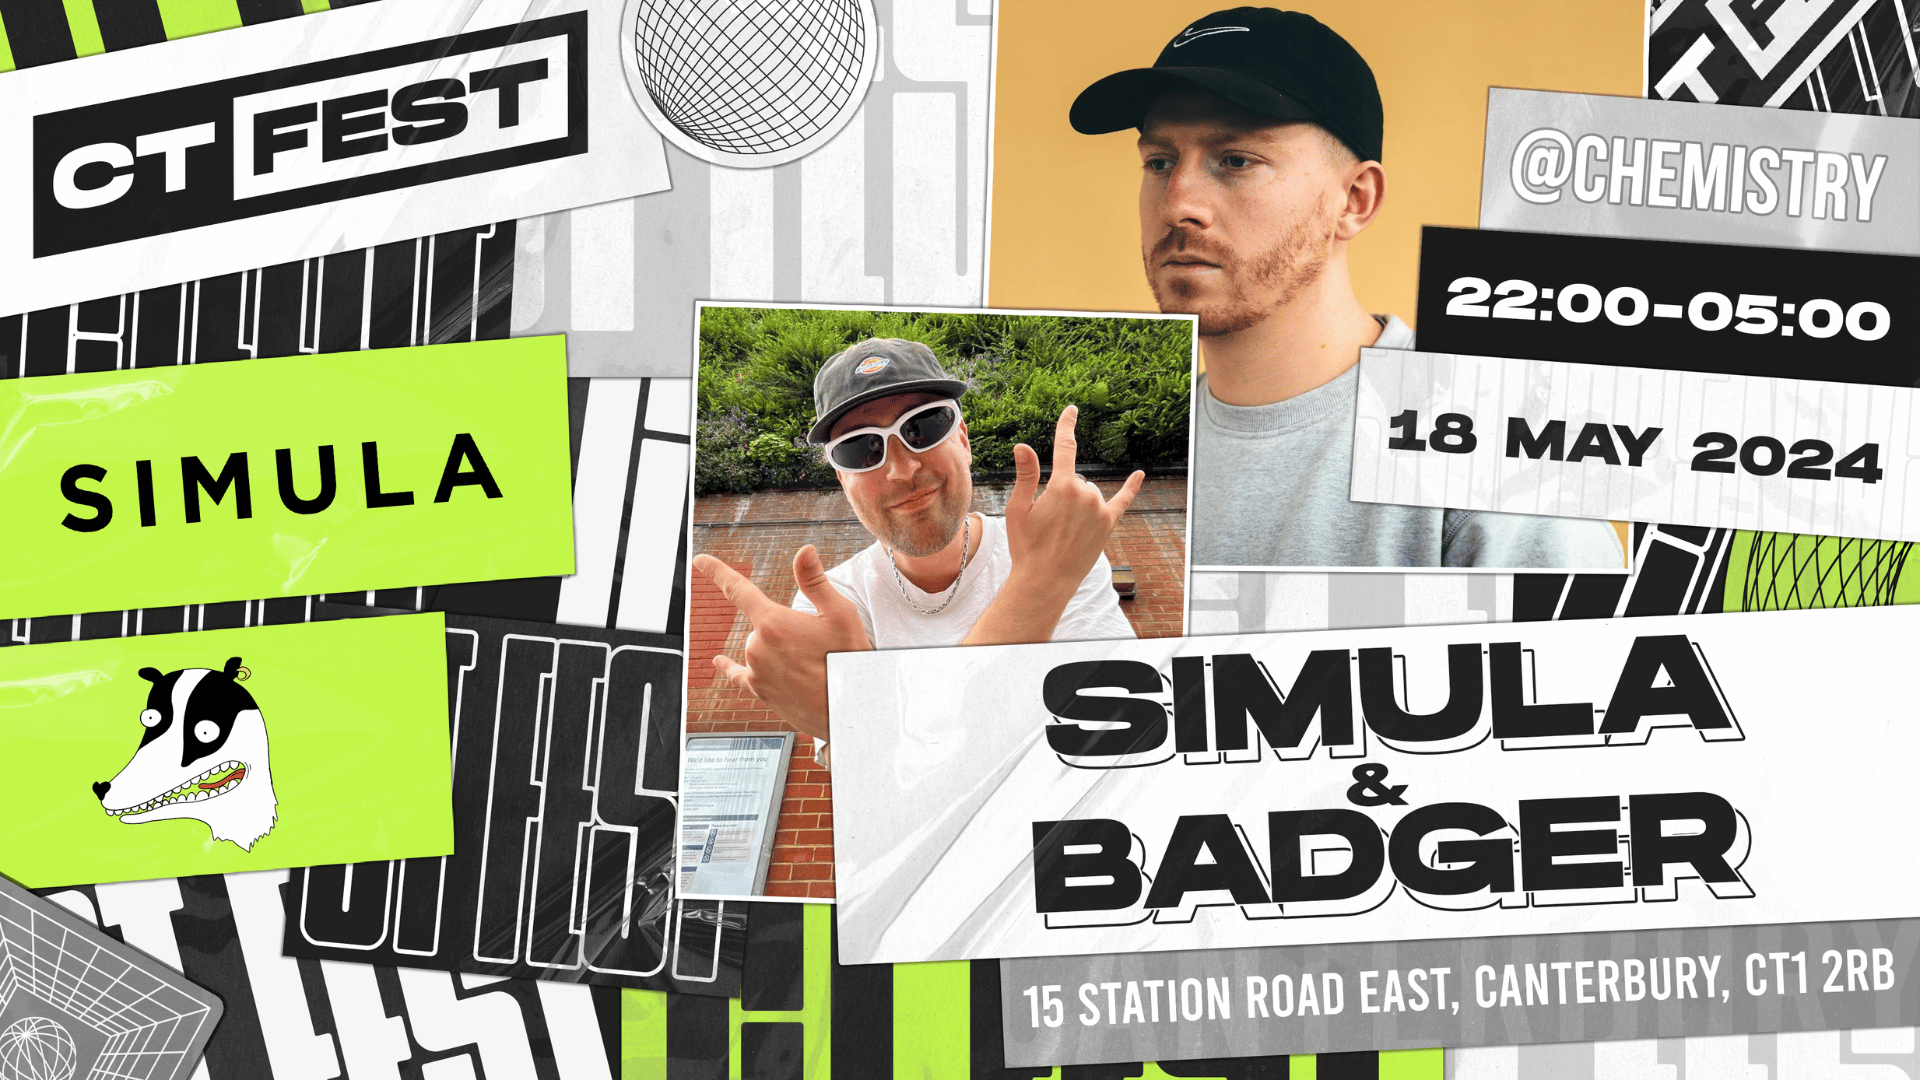 CT Fest ∙ SIMULA & BADGER *ONLY 5 £5 TICKETS LEFT*